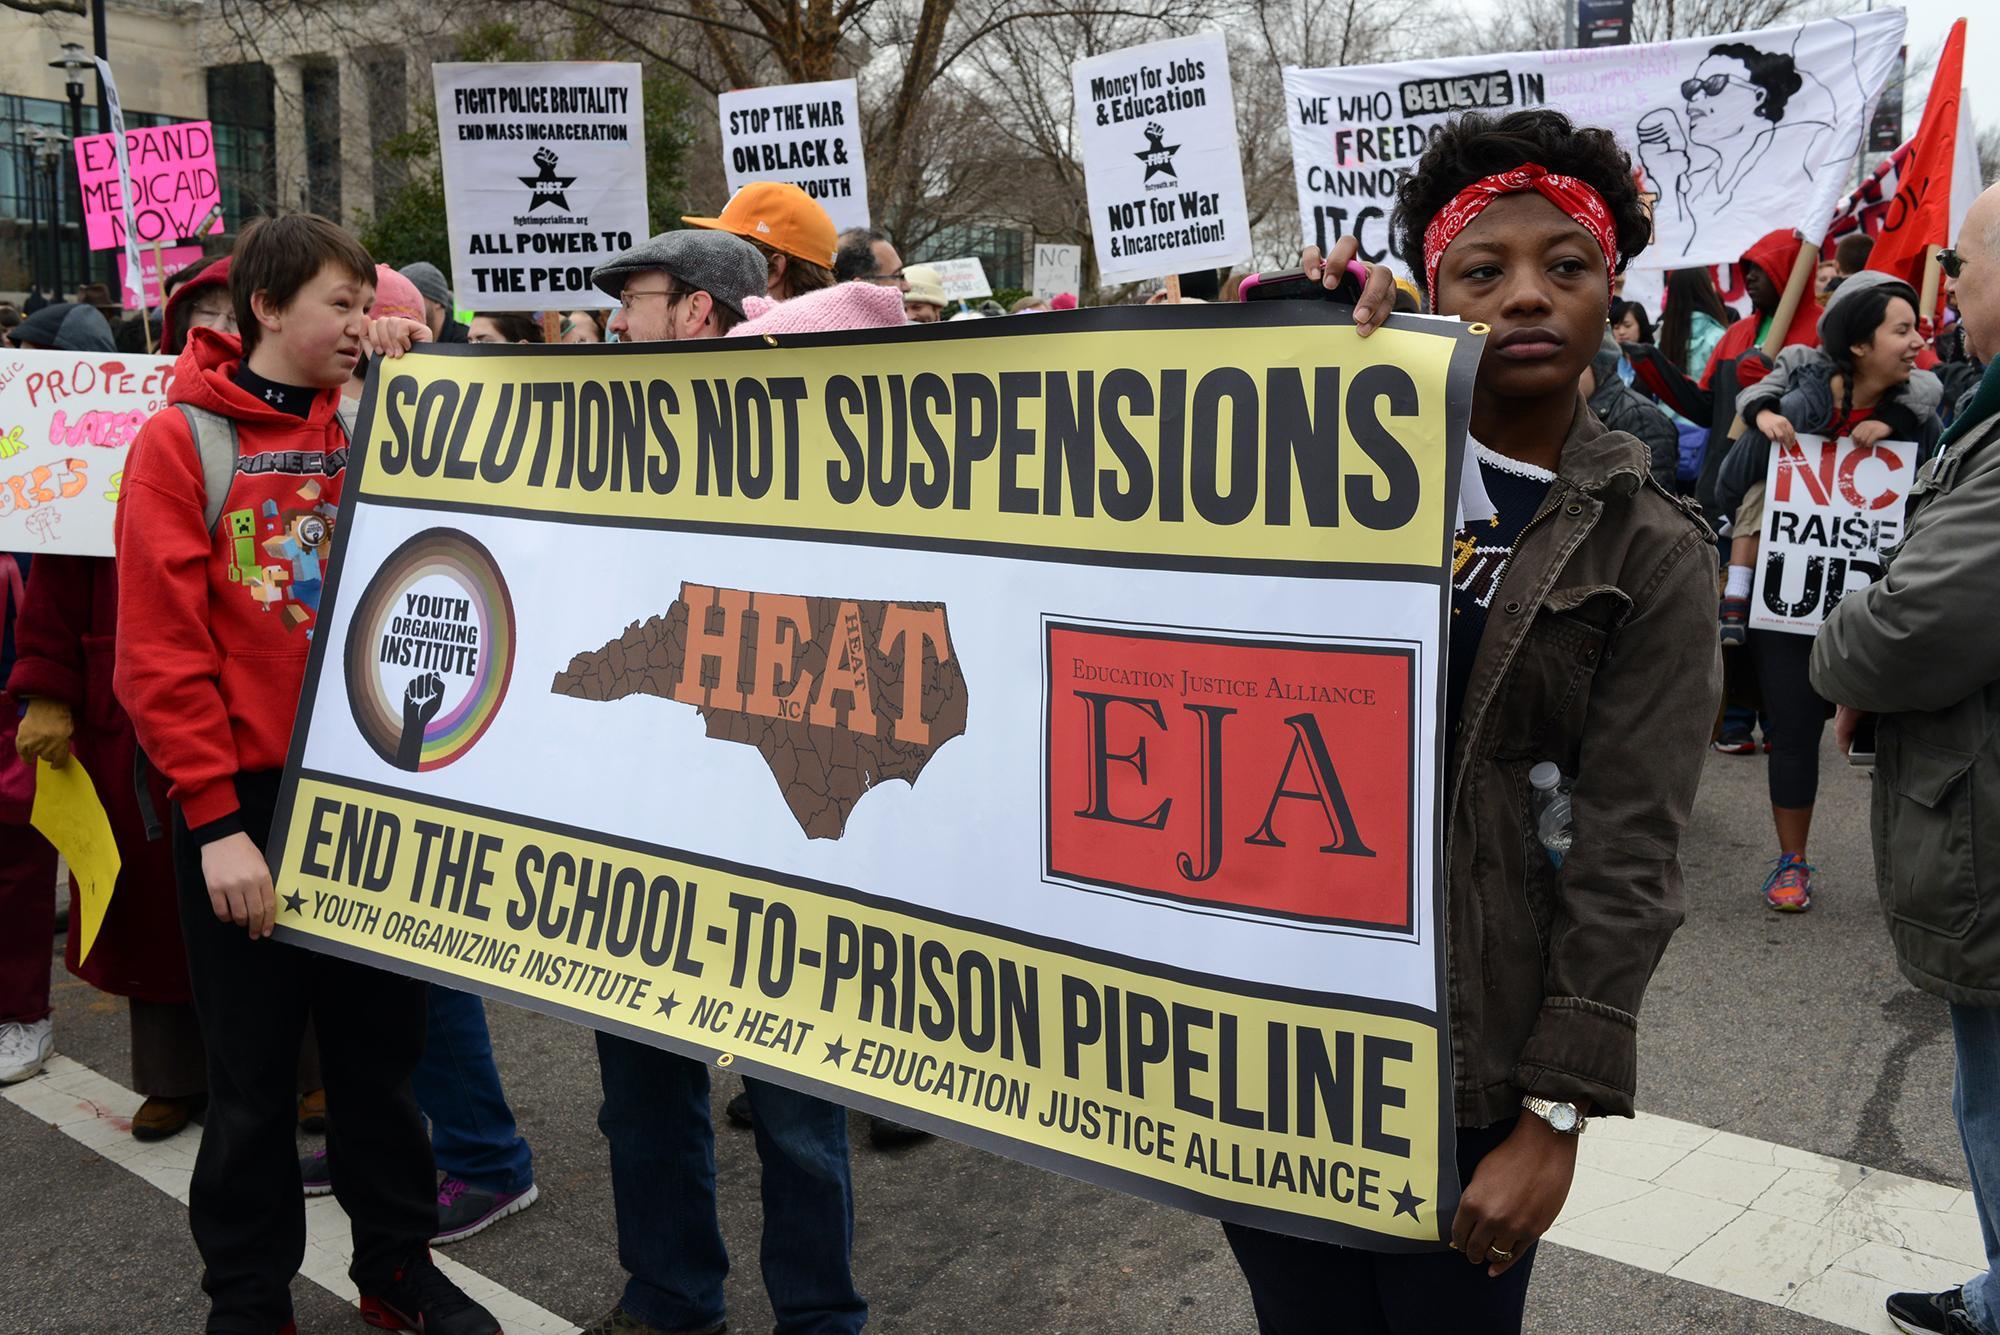 People at a protest holding a sign that reads "Solutions not suspensions. End the school to prison pipeline."